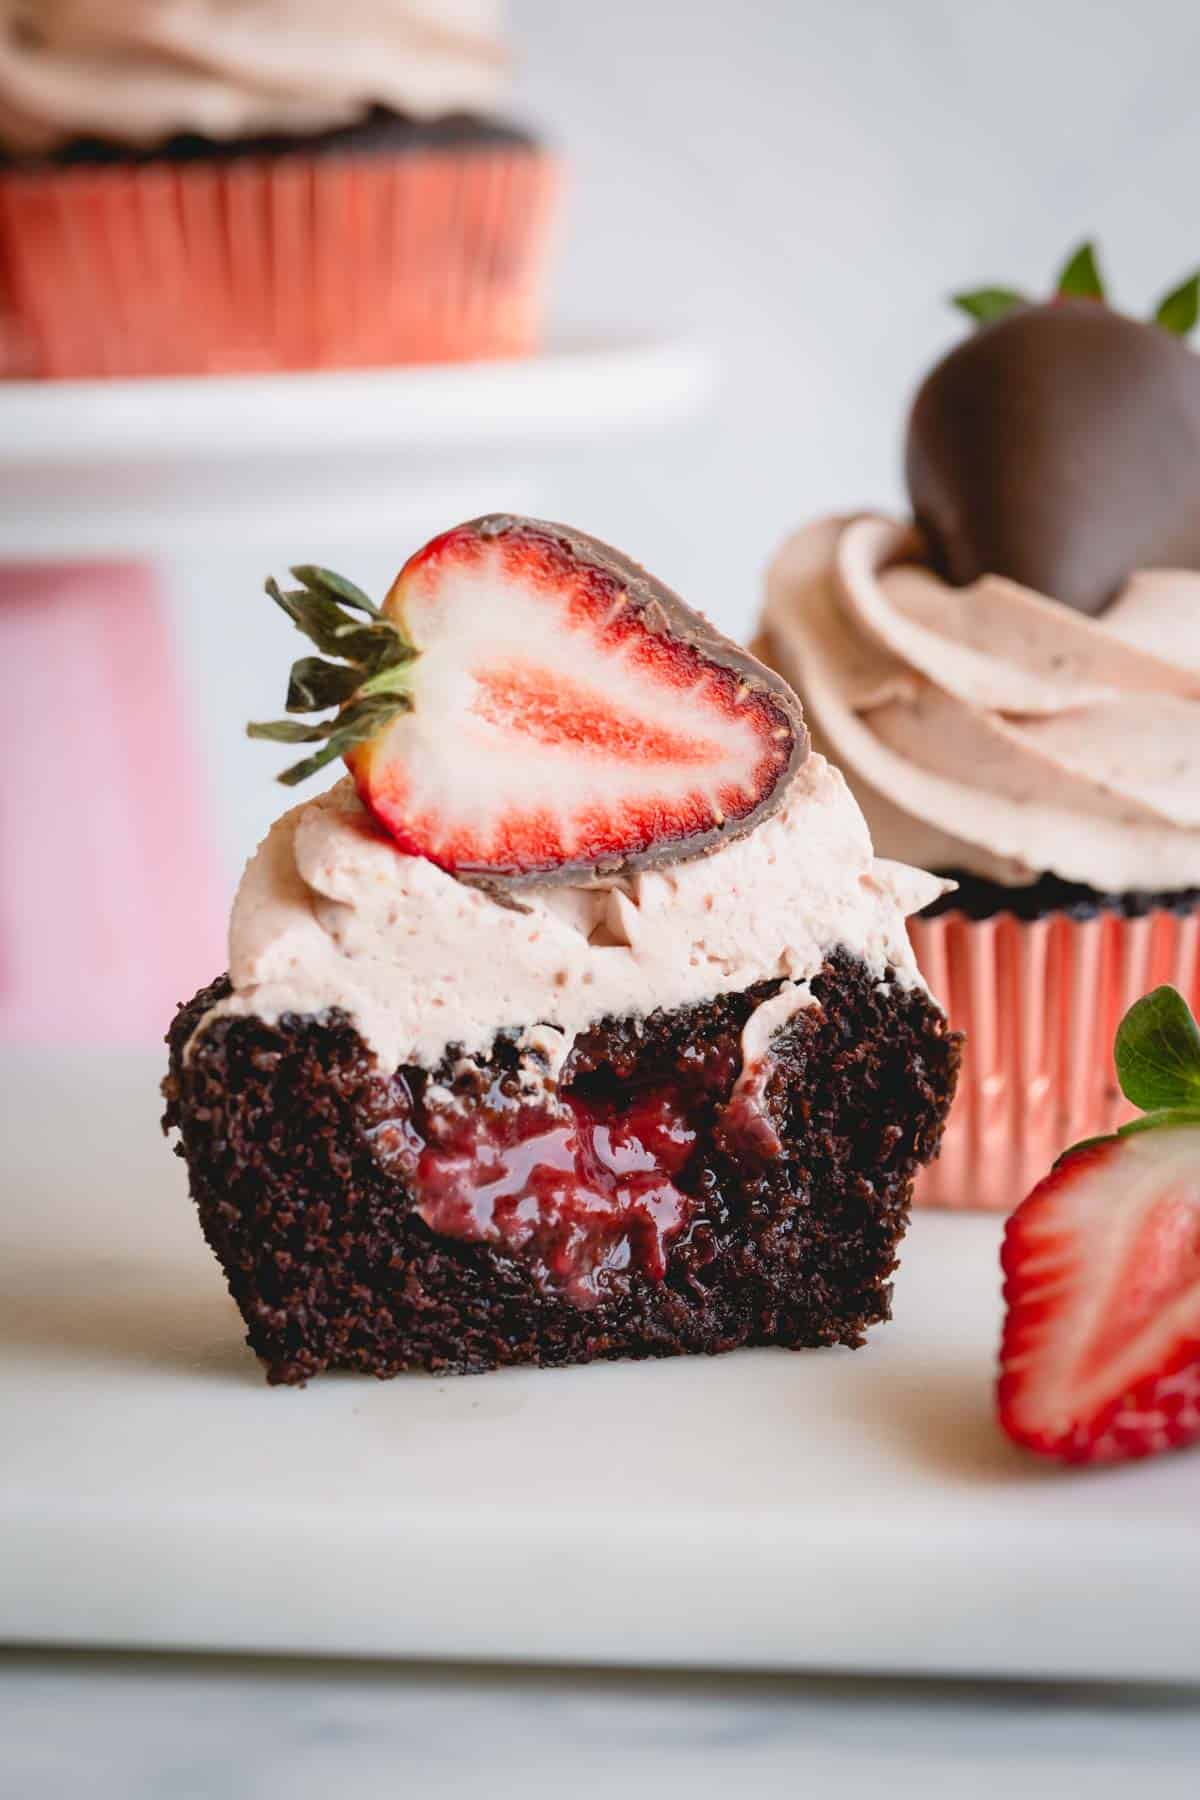 A strawberry chocolate cupcake topped with a chocolate strawberry sliced in half exposing the jam filling.